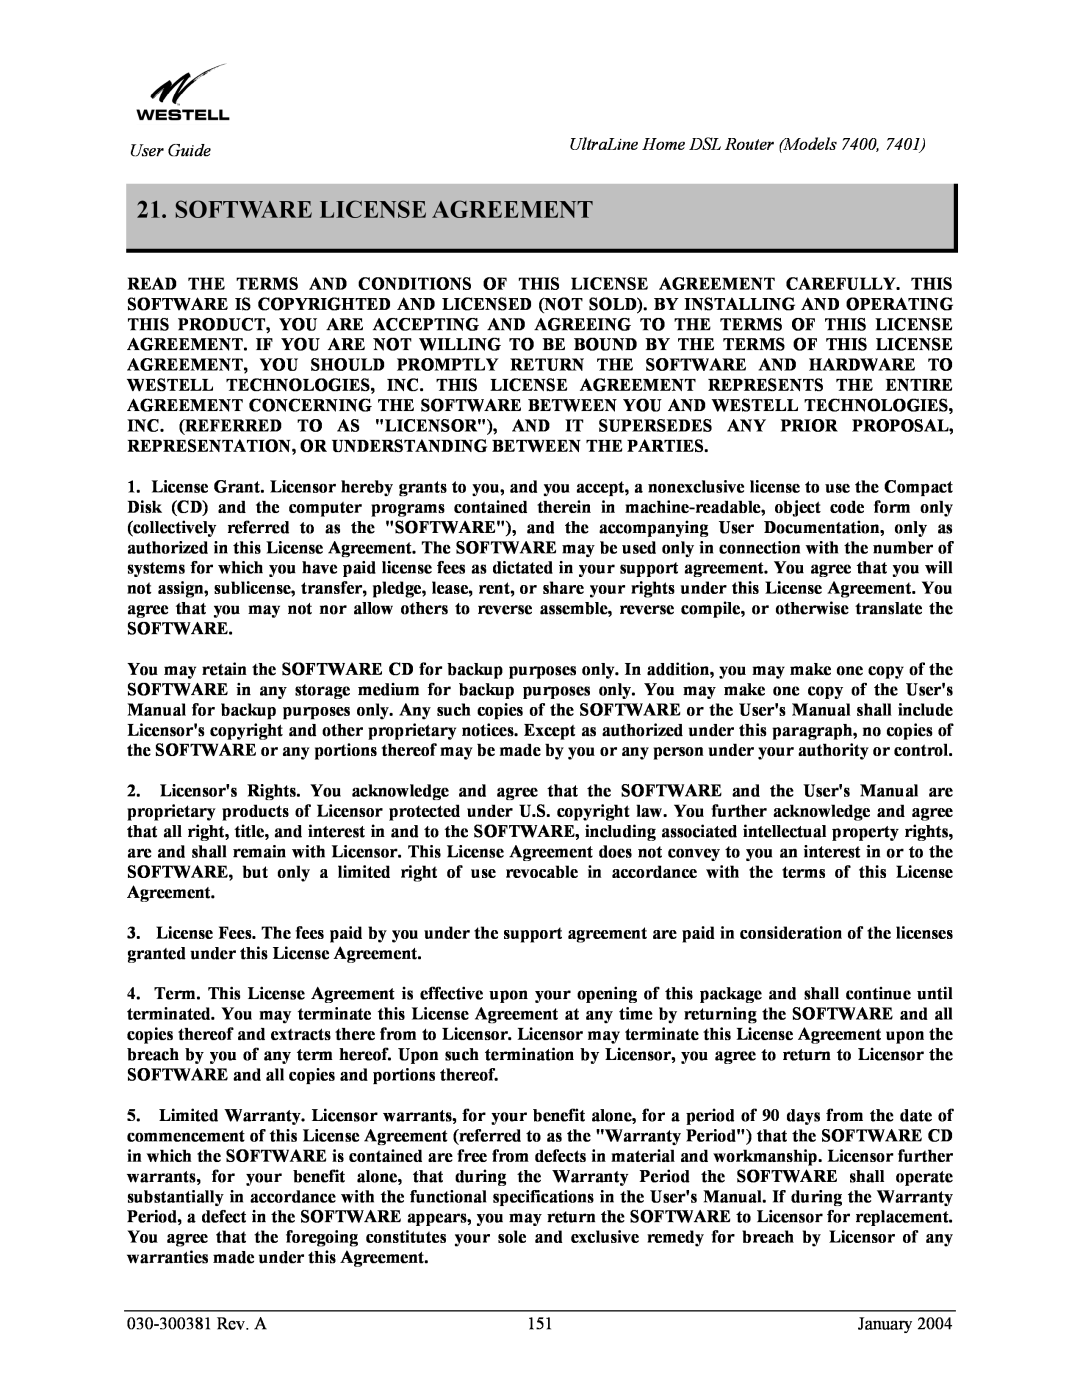 Westell Technologies 7400, 7401 manual Software License Agreement 